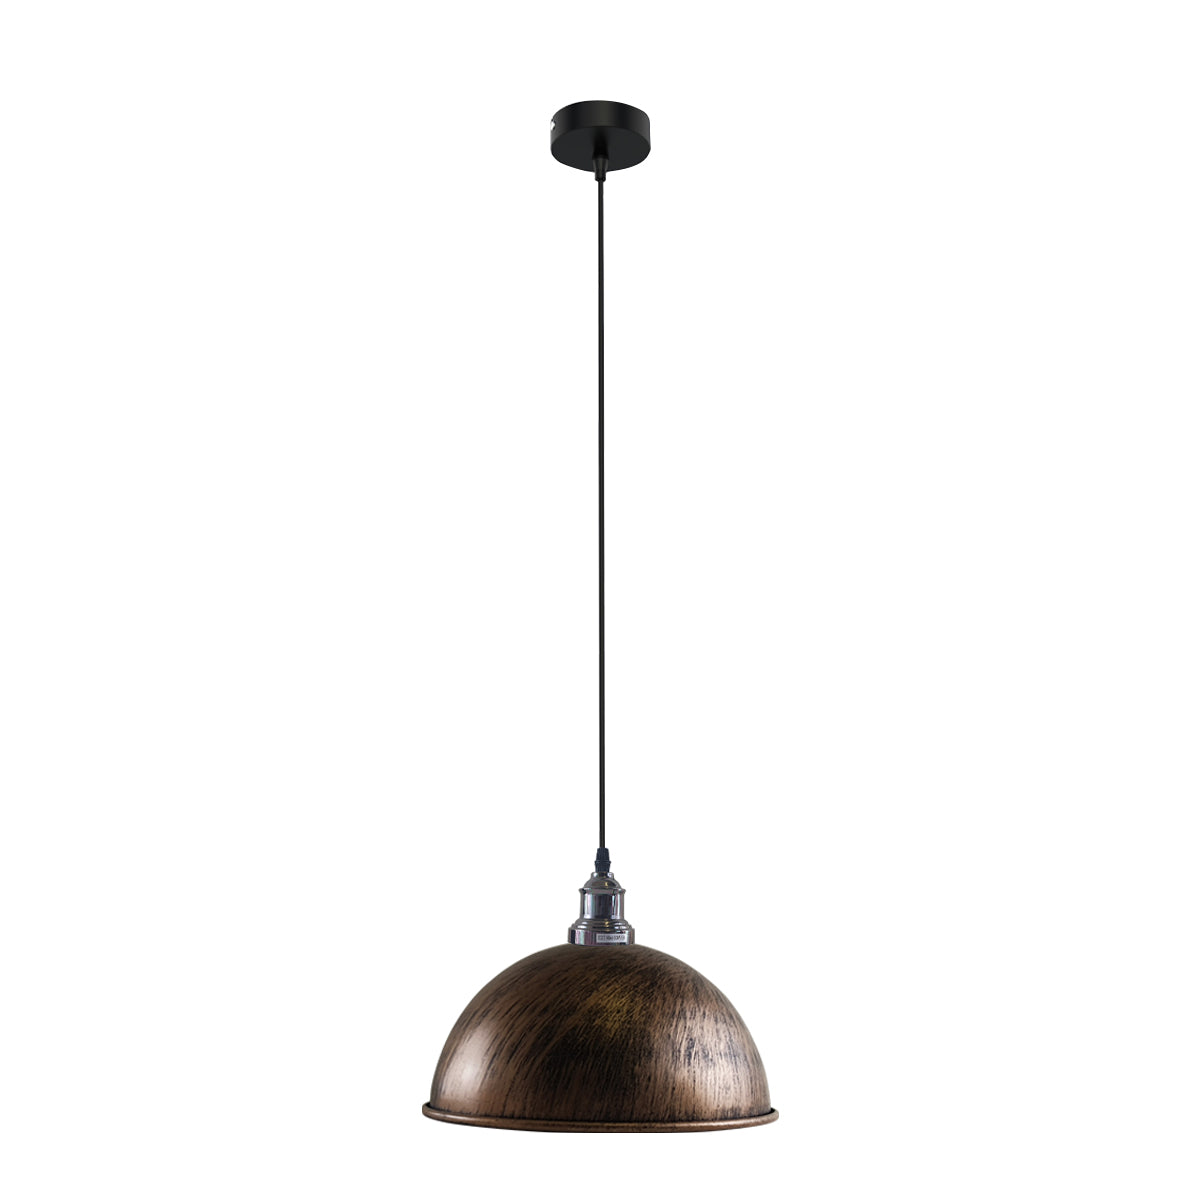  Brushed Copper Industrial Metal Dome Shade Pendant Light